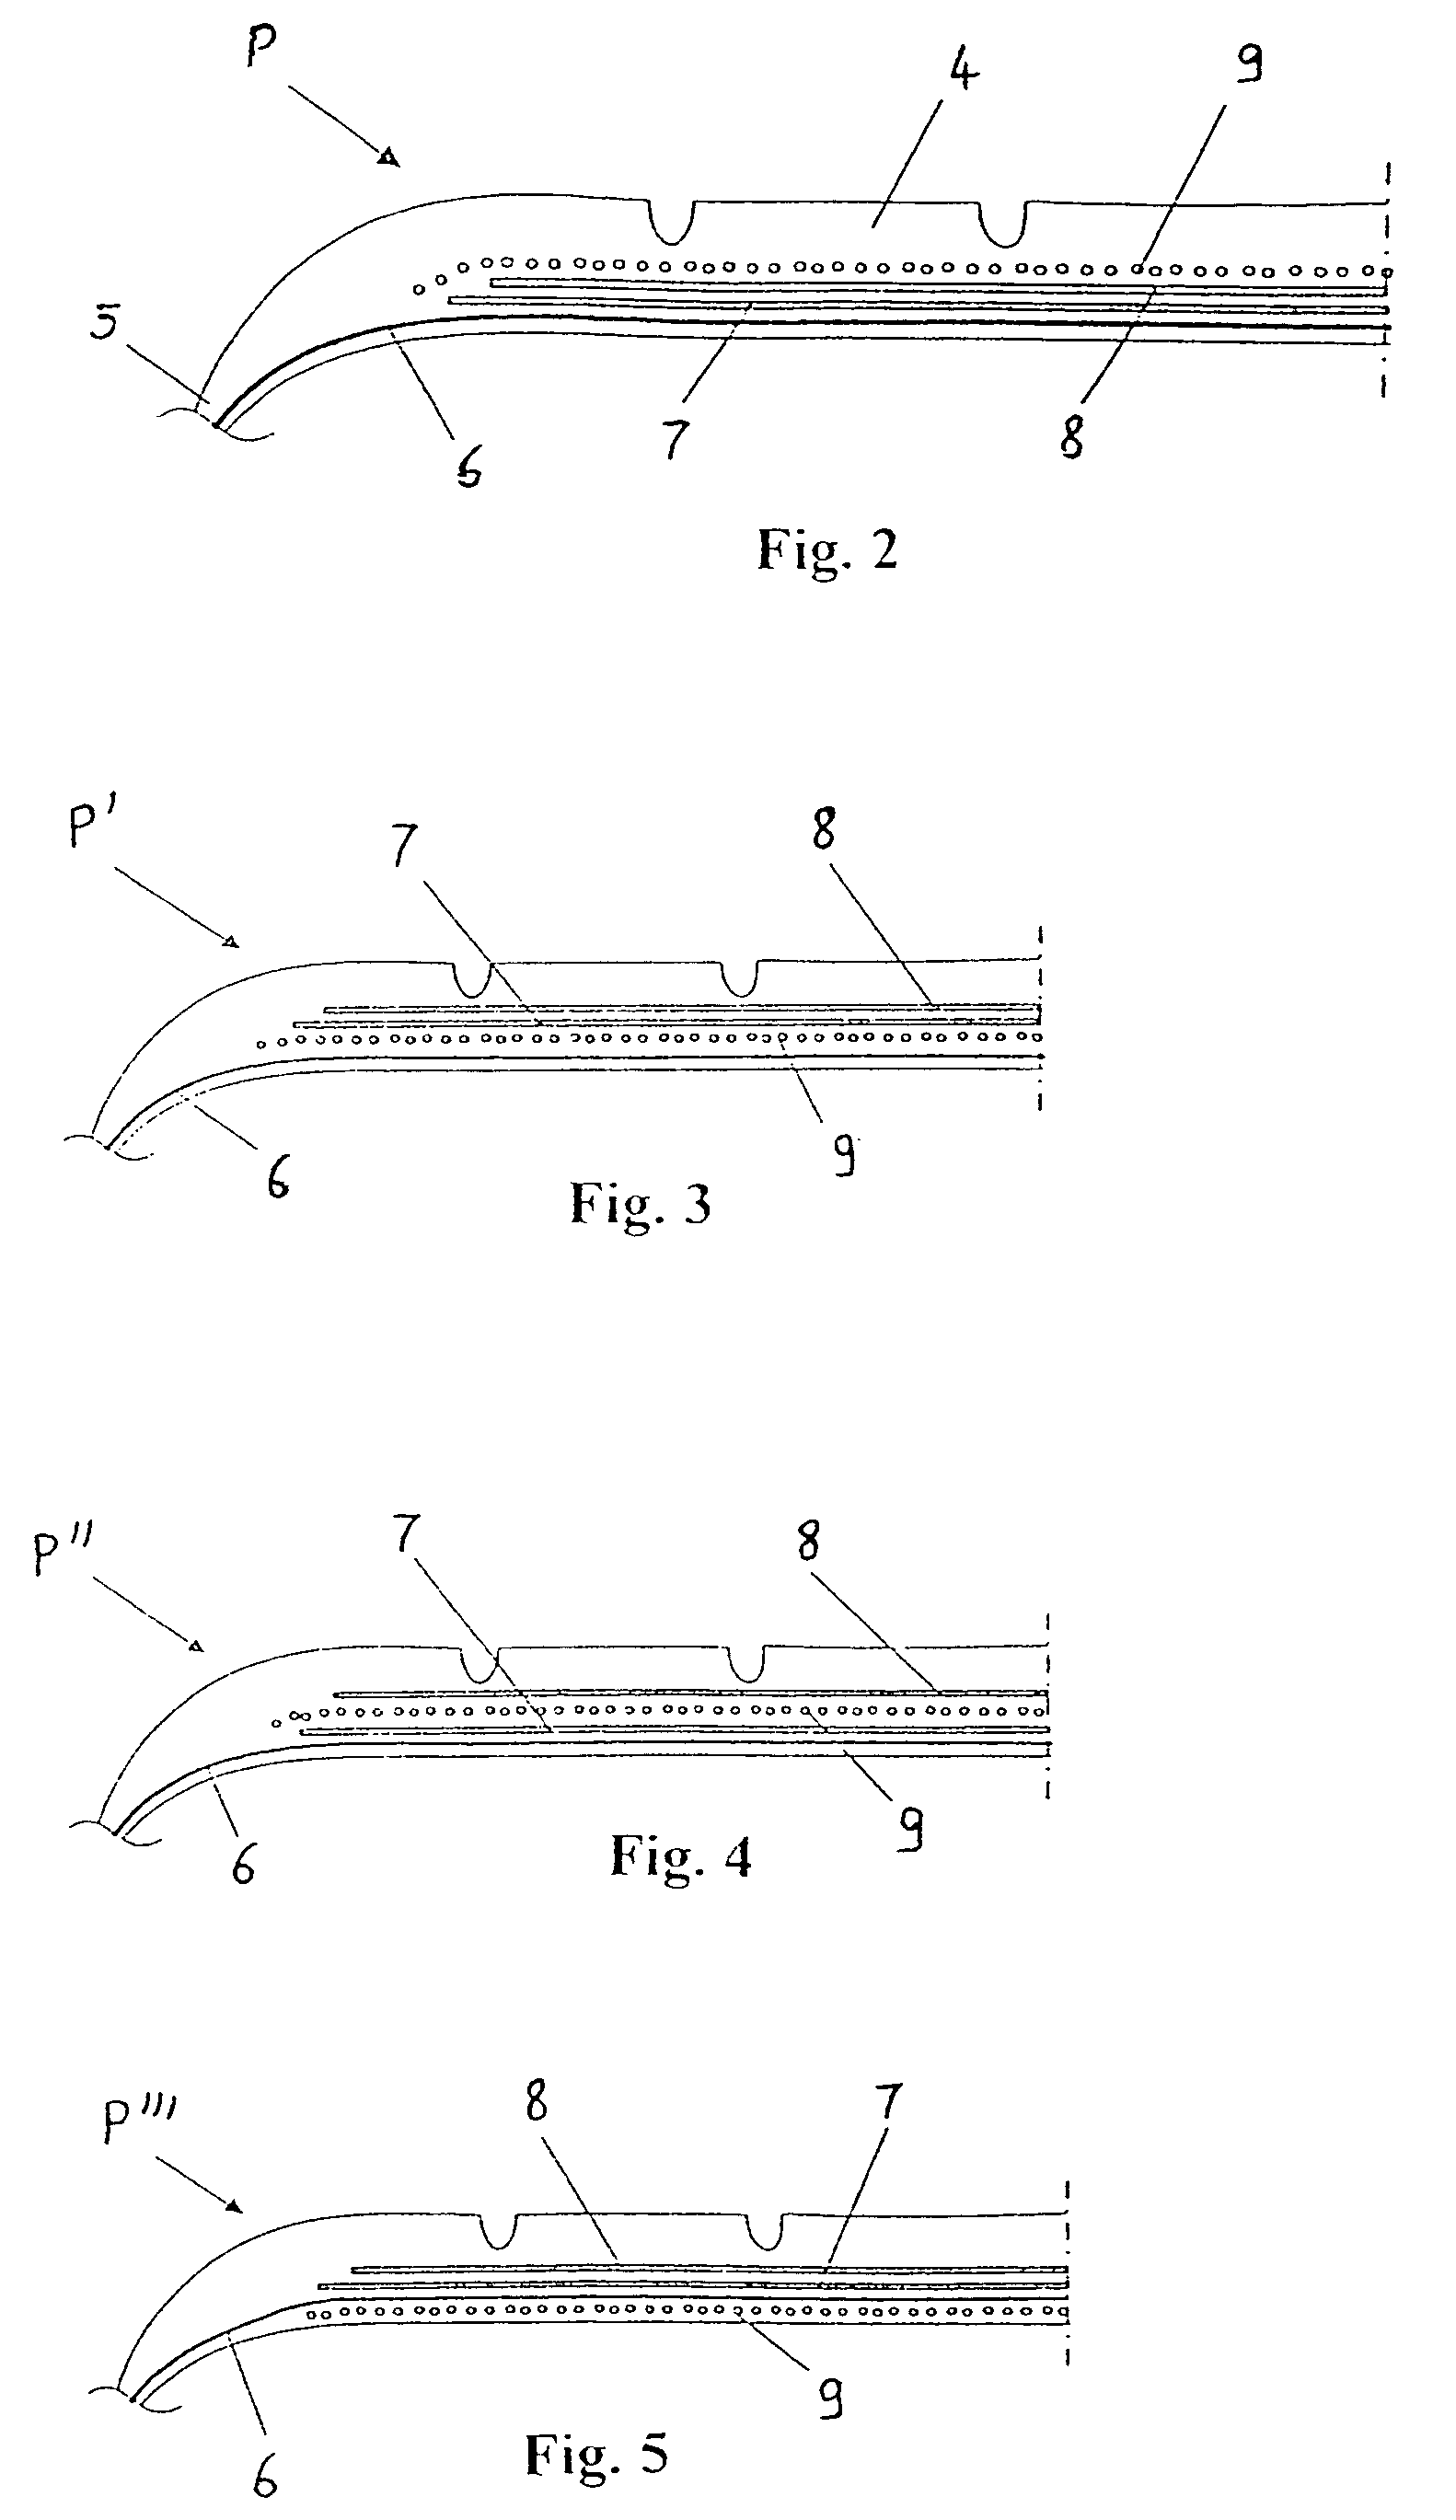 Hybrid cables, a process for obtaining such and composite fabrics incorporating such